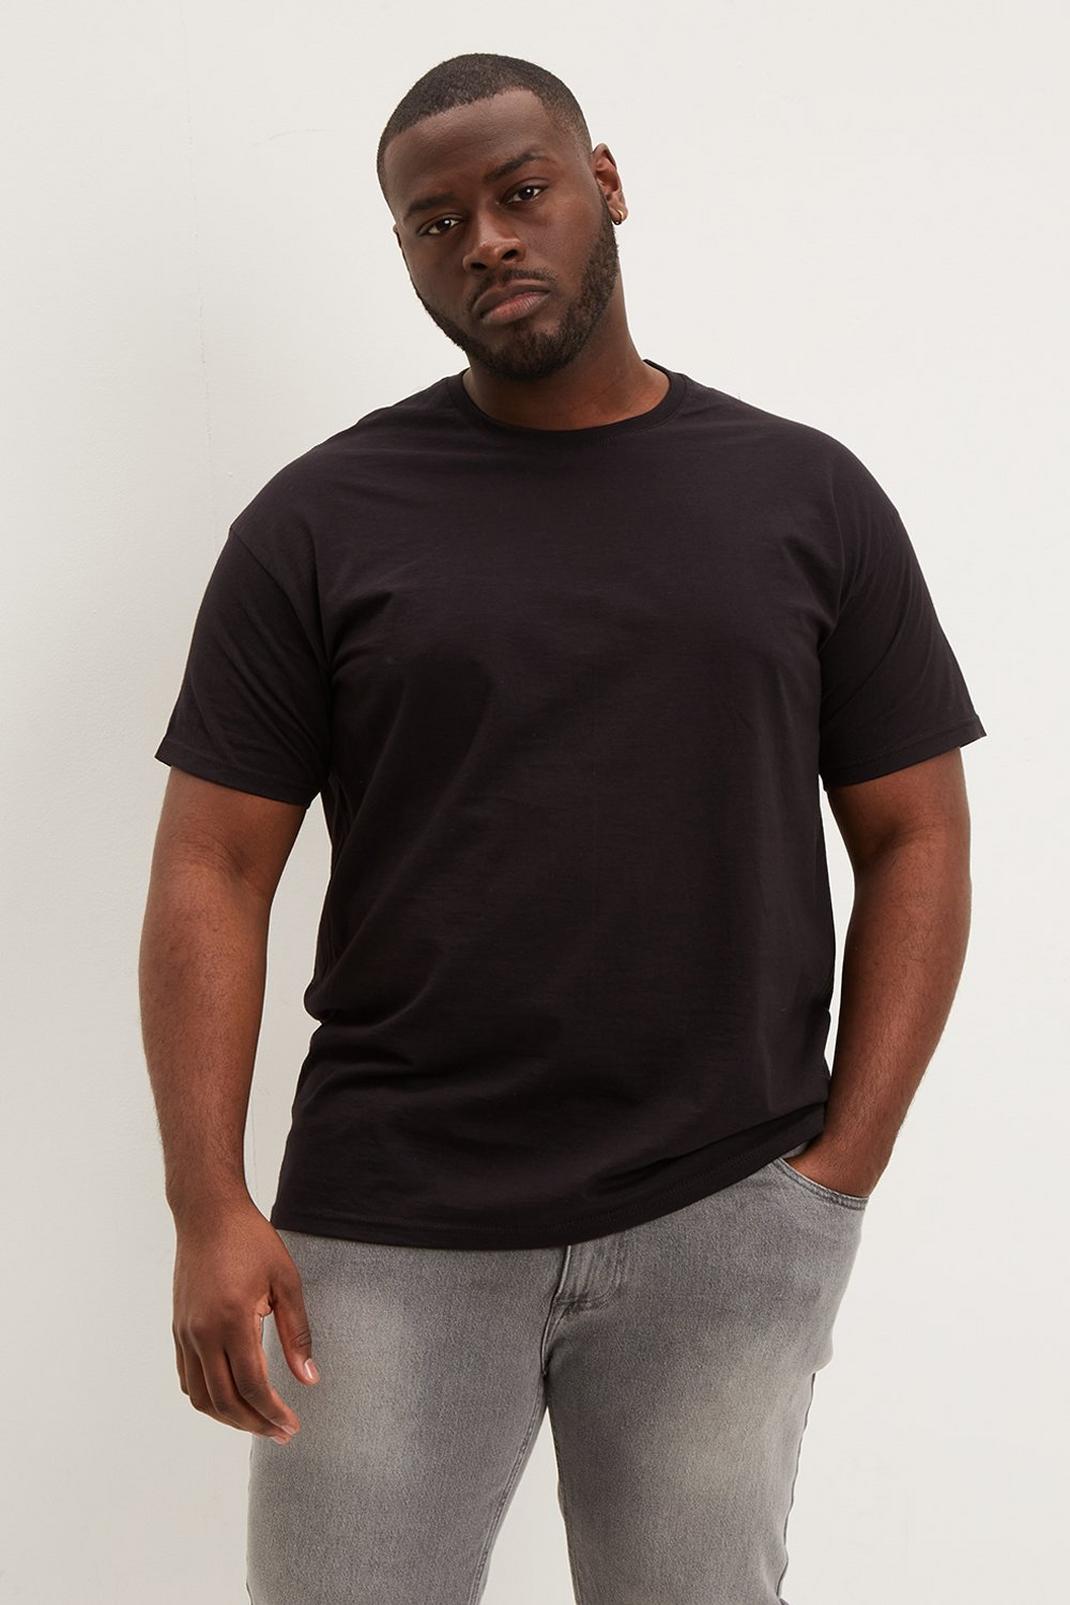 105 Plus And Tall Short Sleeve Basic Crew Tee image number 1